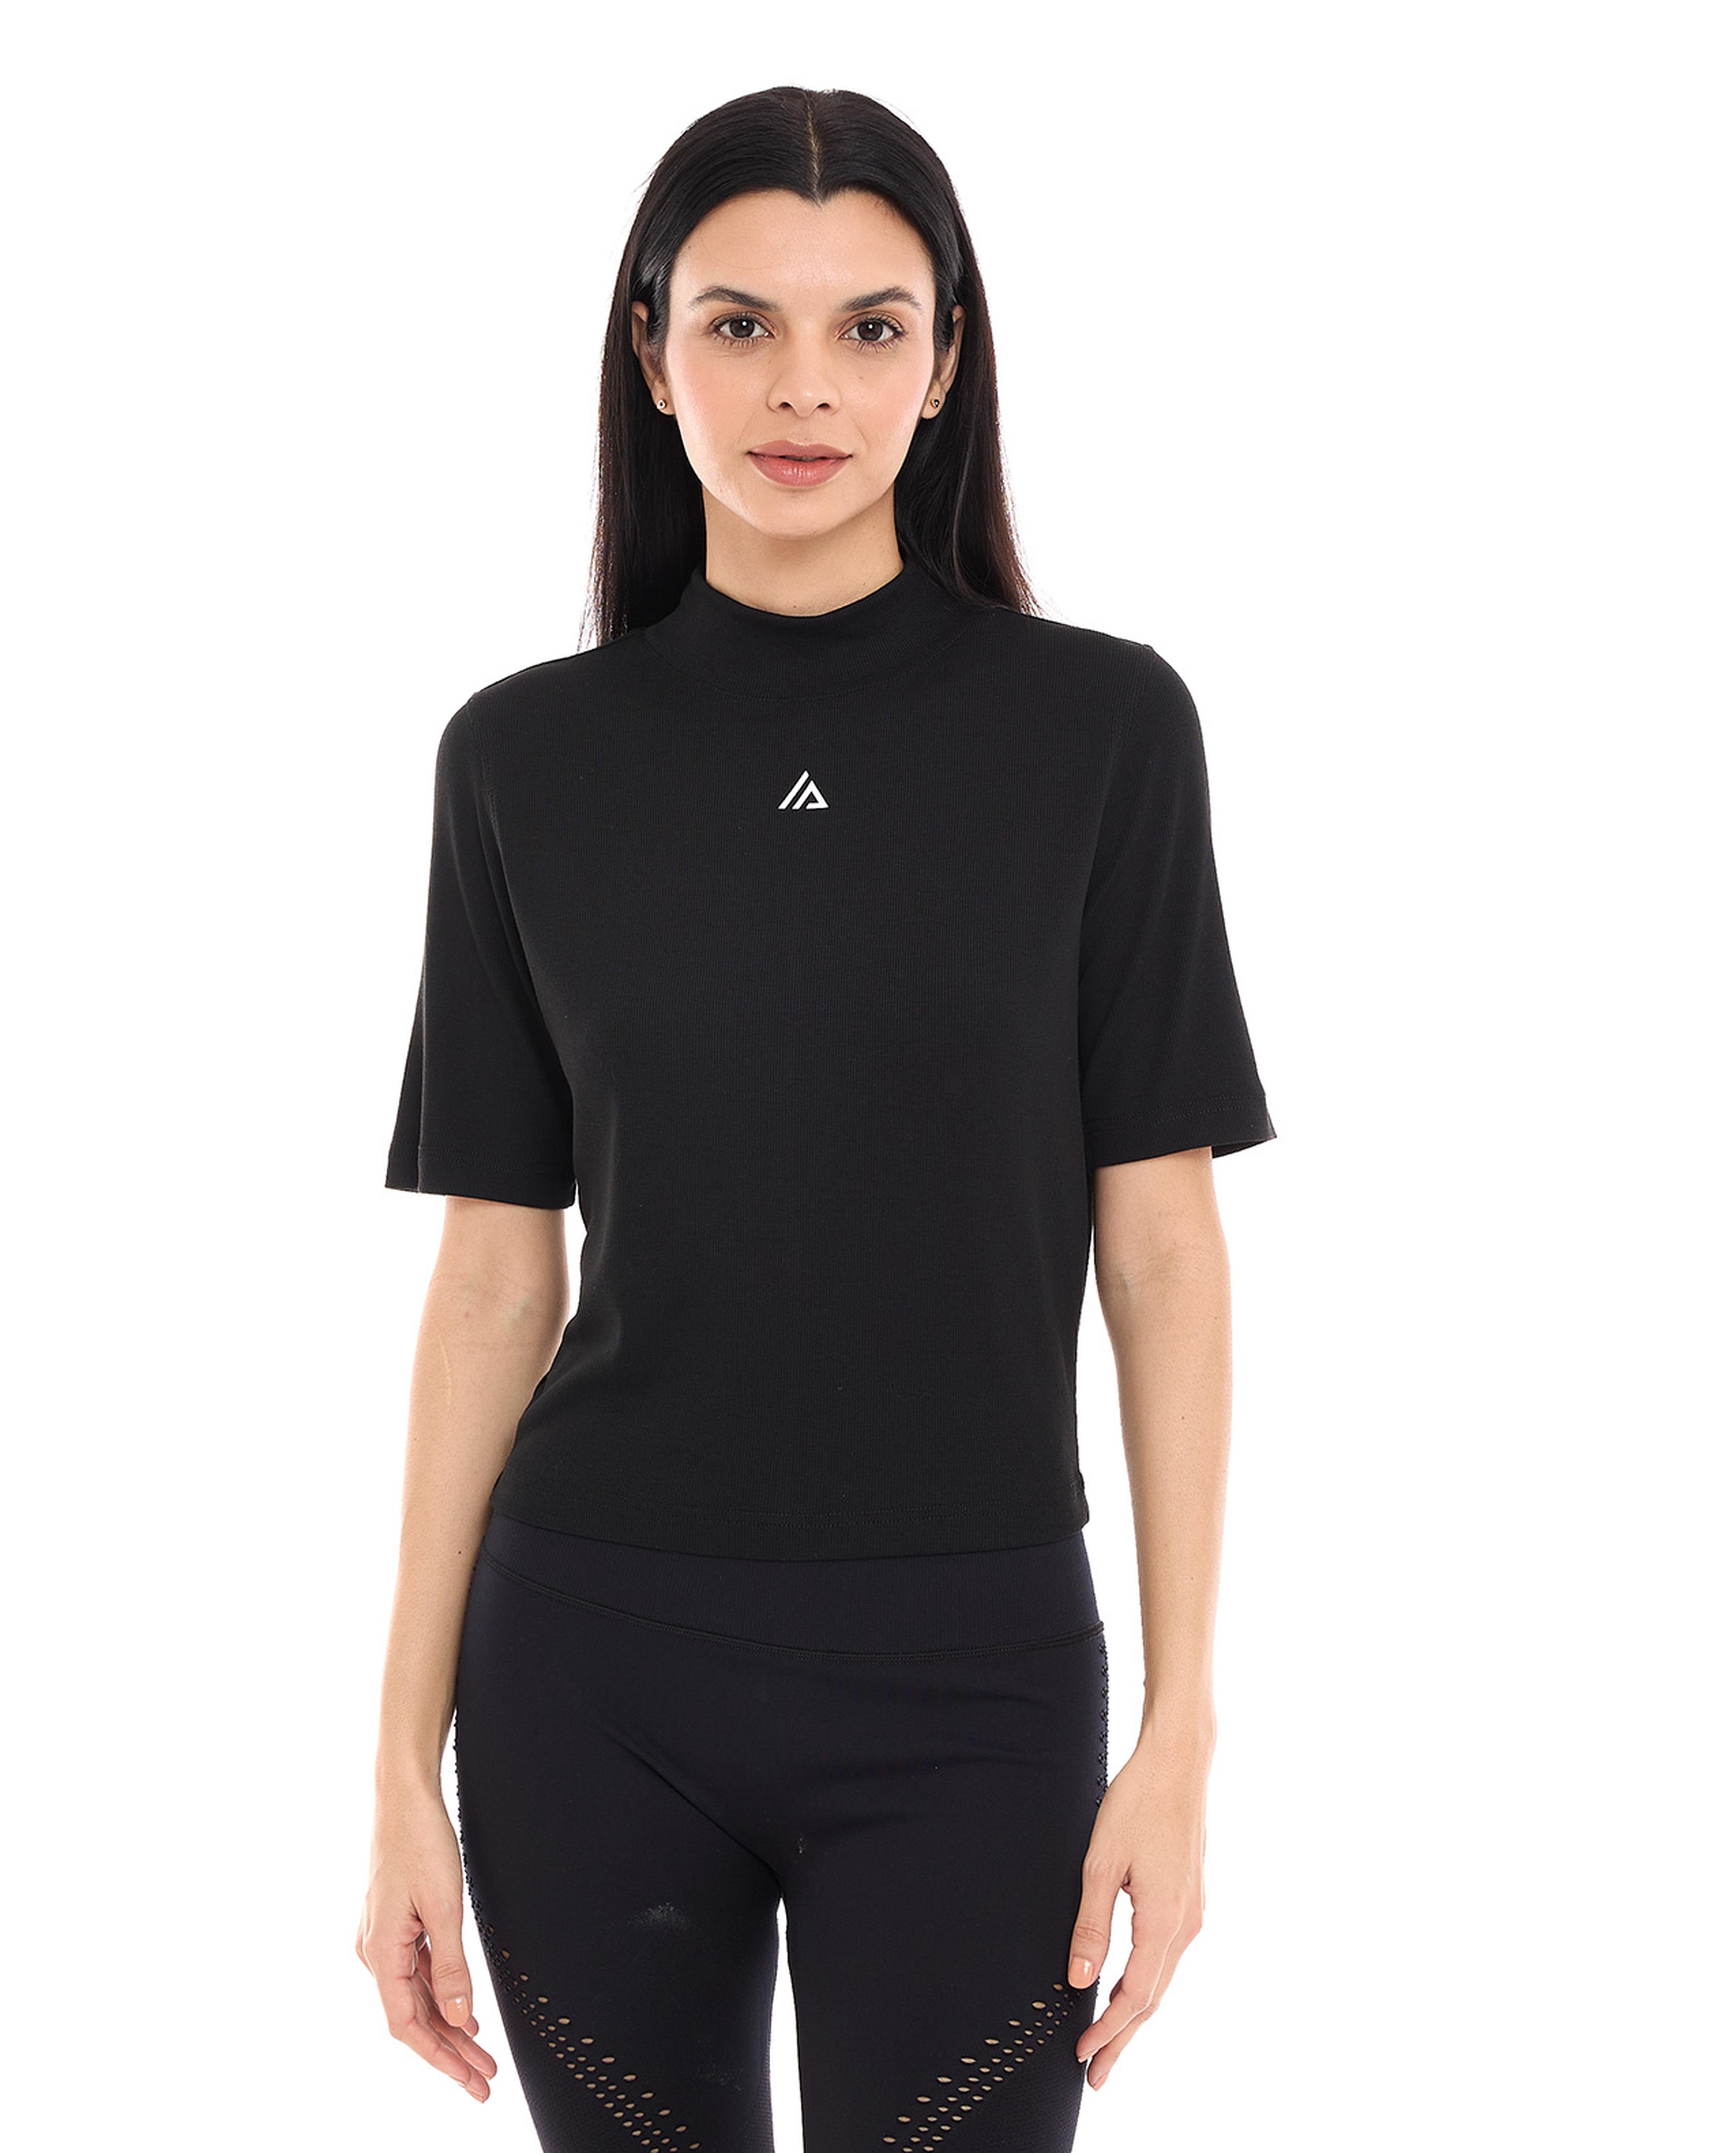 Ribbed Active Top with Mock Neck and Short Sleeves